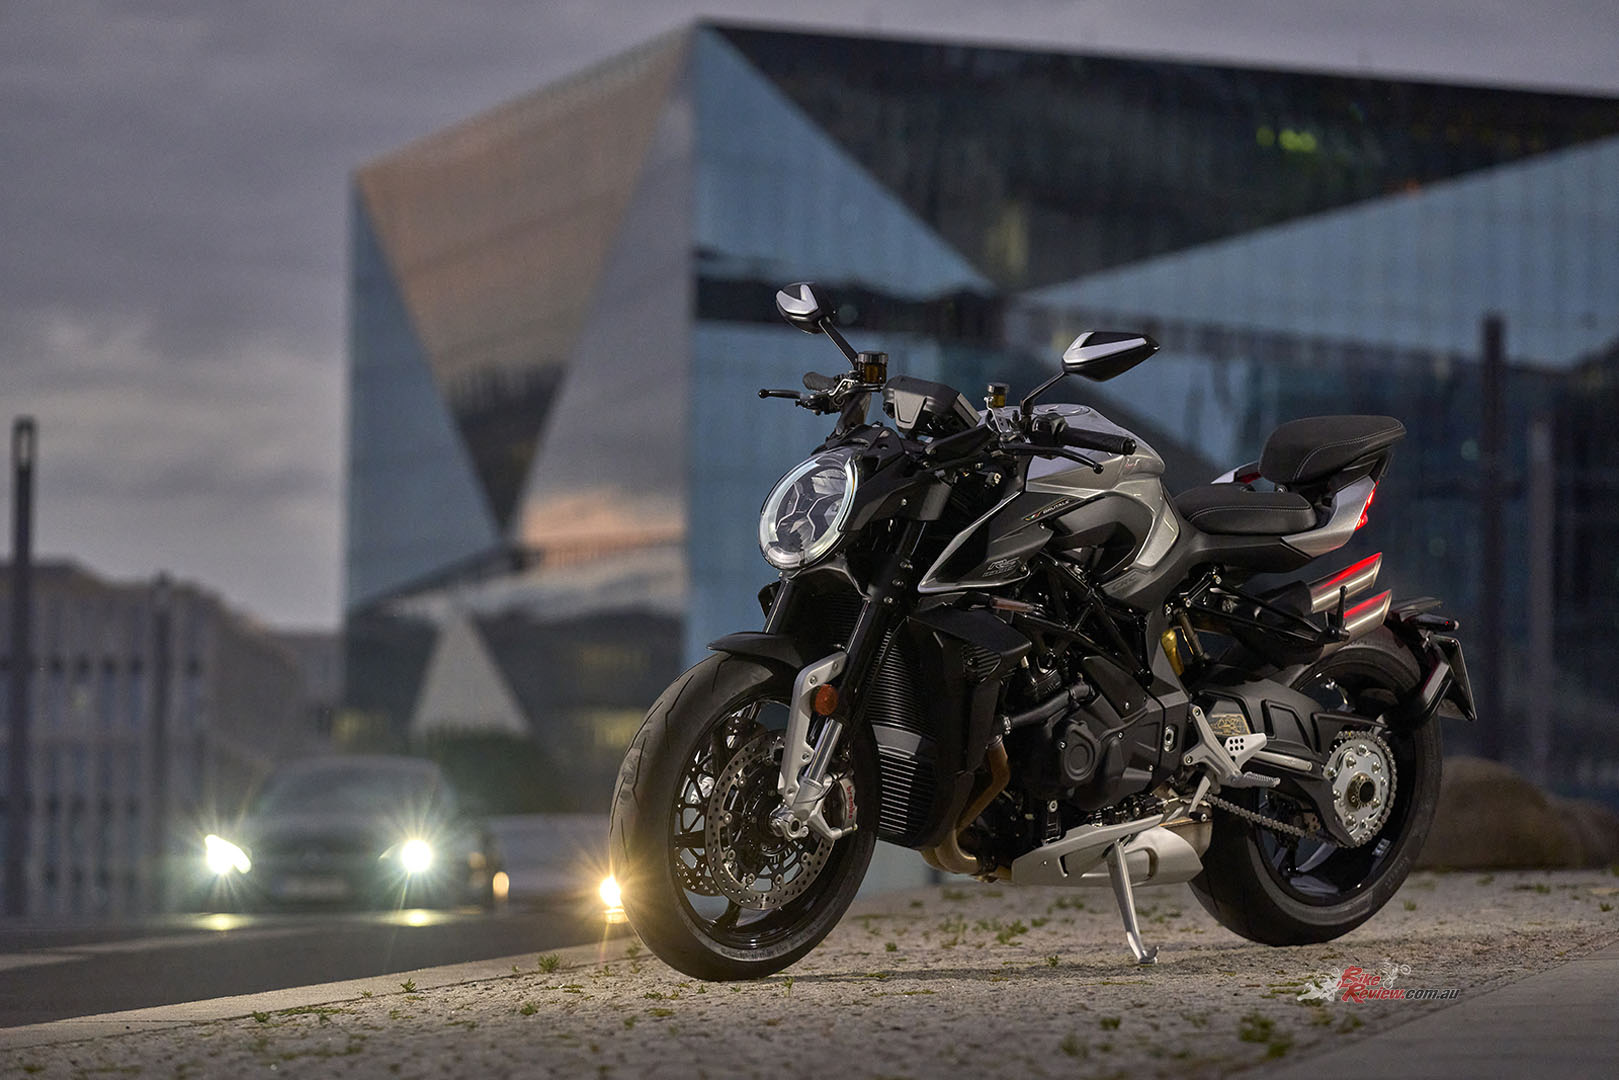 New Model: More adjustment with new MV Agusta Brutale 1000 RS - Bike Review